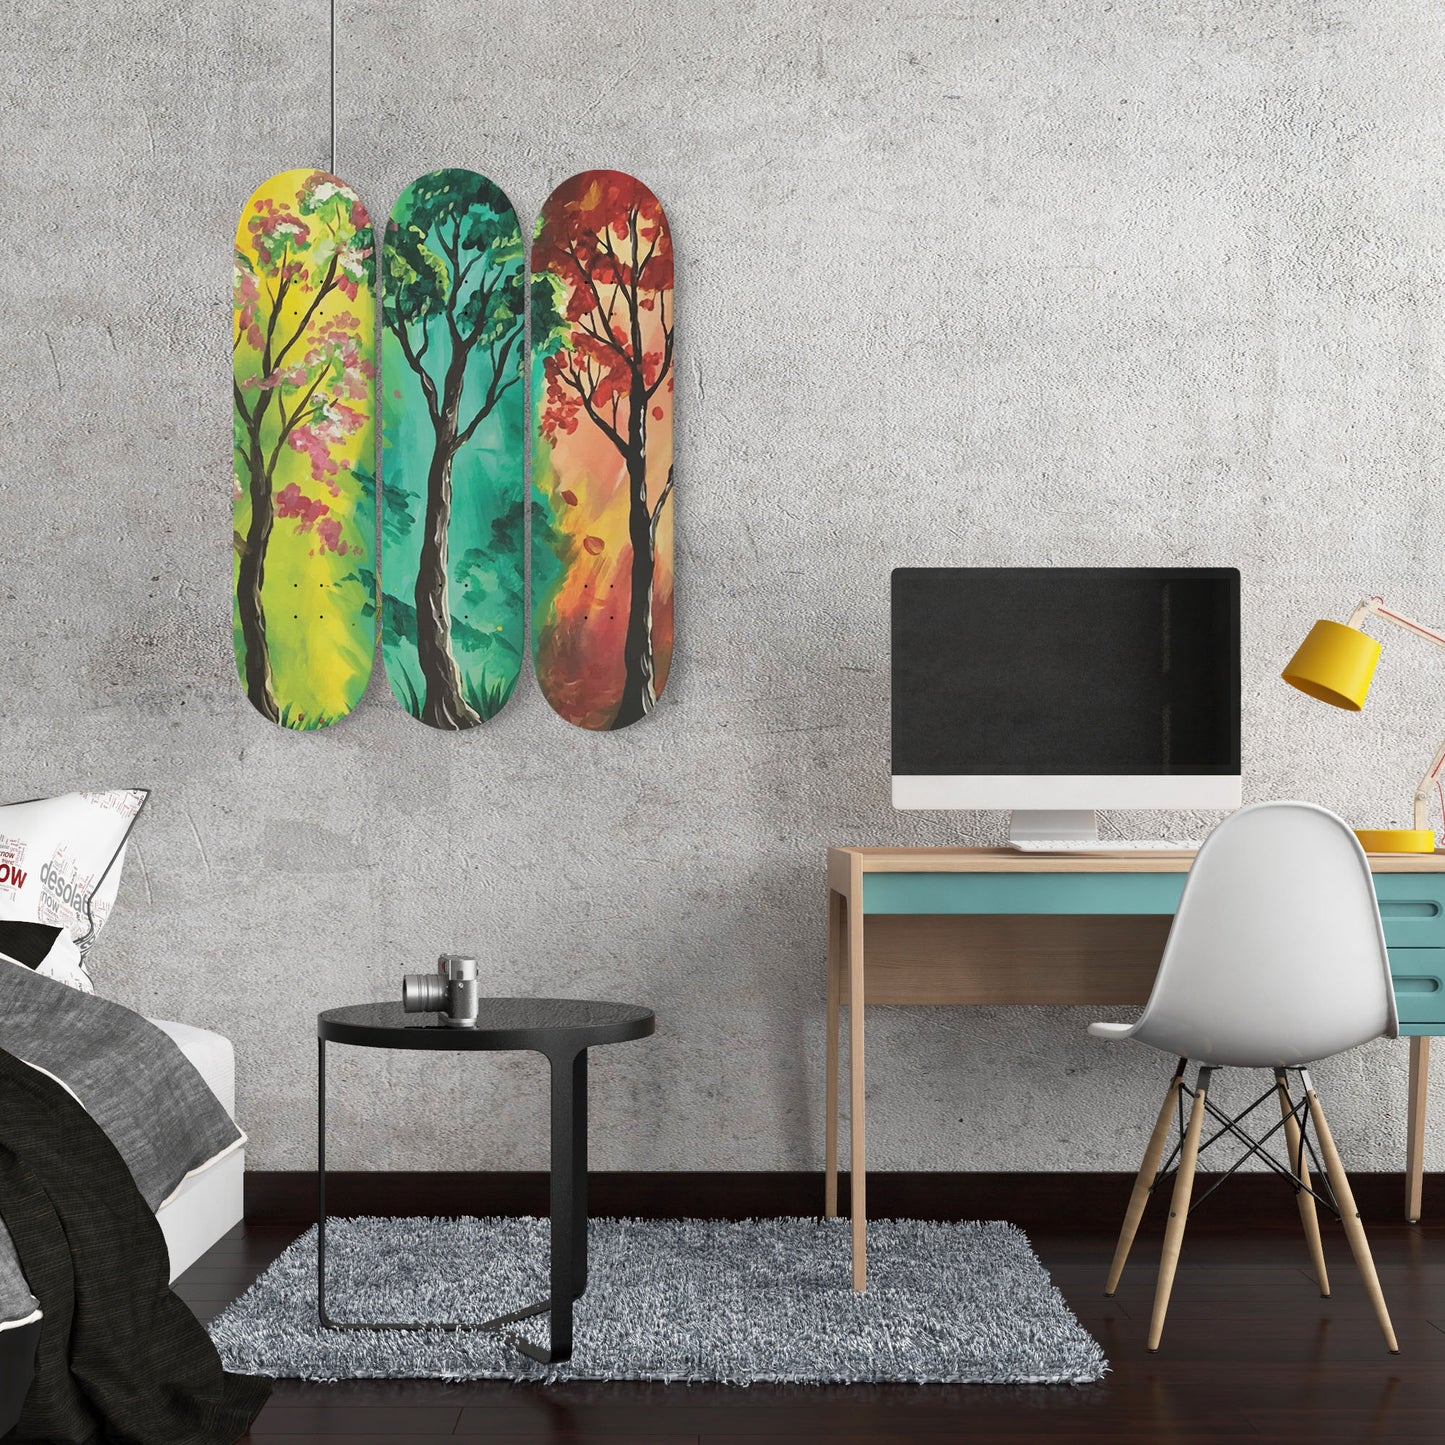 Random Colorful Artwork 10 | Skateboard Deck Wall Art, Wall Hanged Room Decoration, Maple Wood, Accent Gift for Home, Aesthetic Wall Art